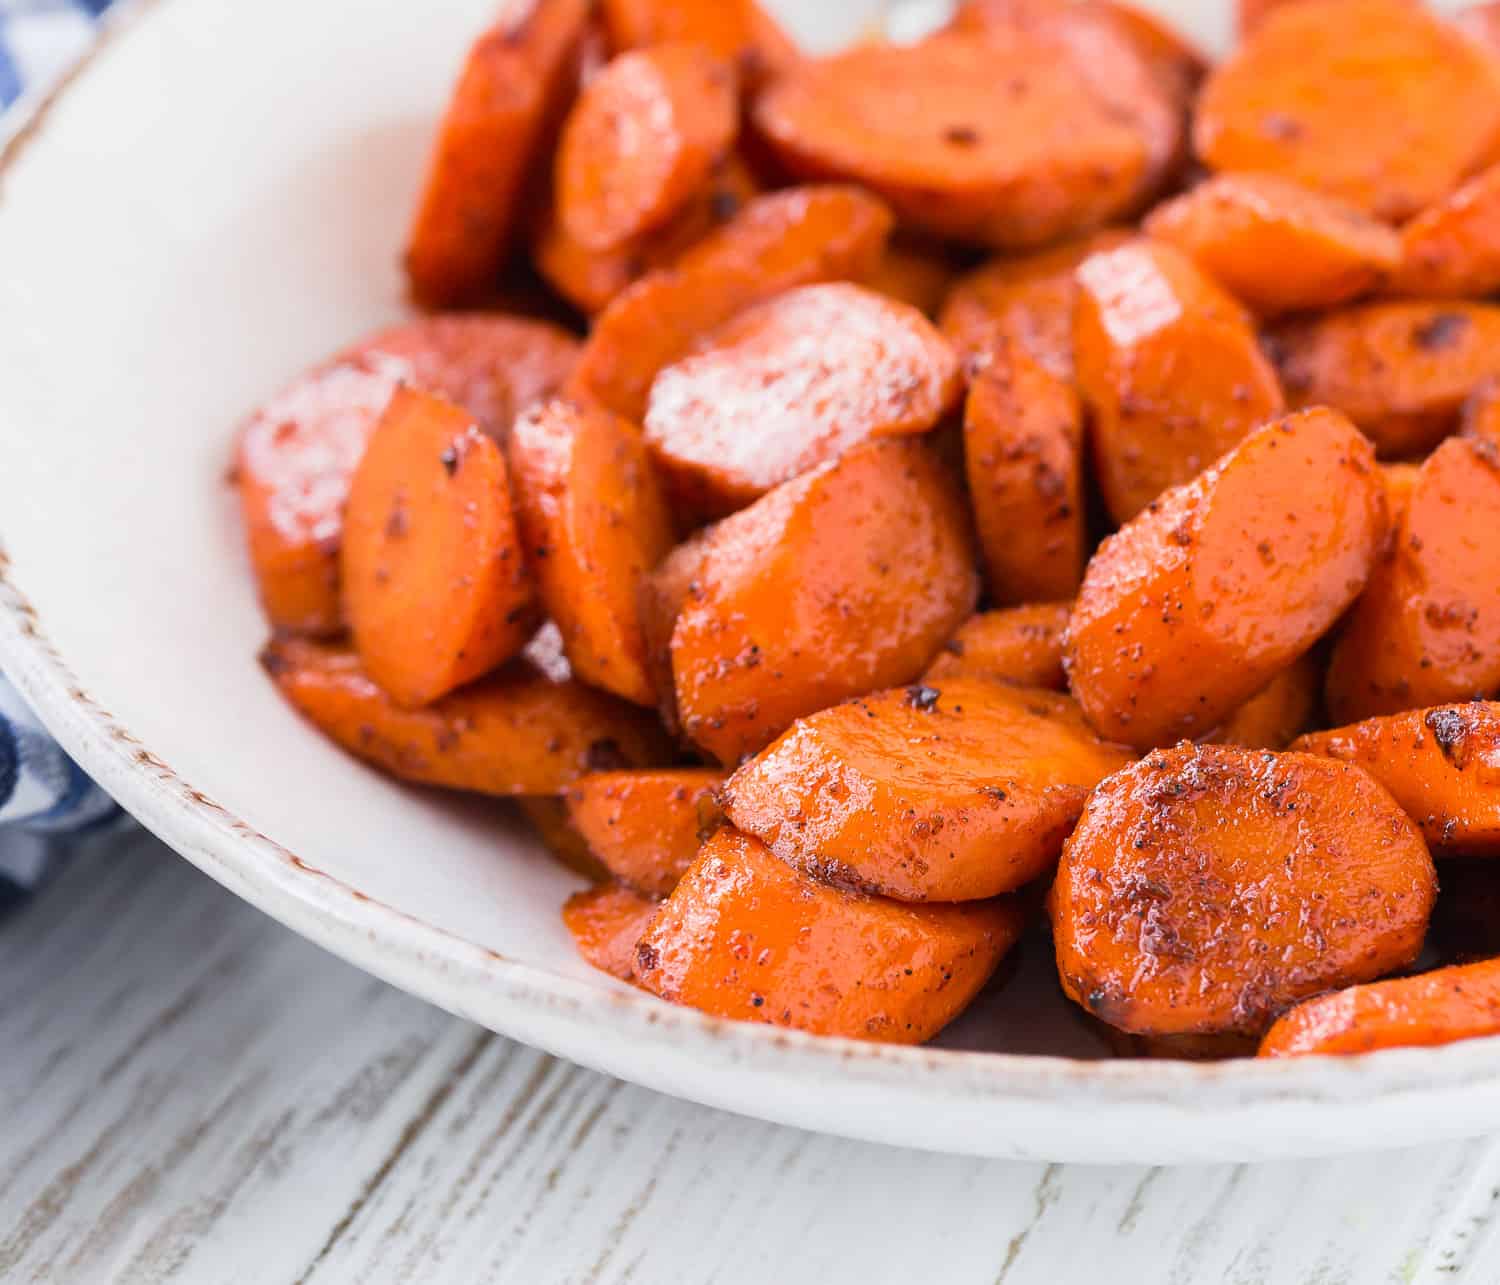 Cooked carrots with honey and chili powder.